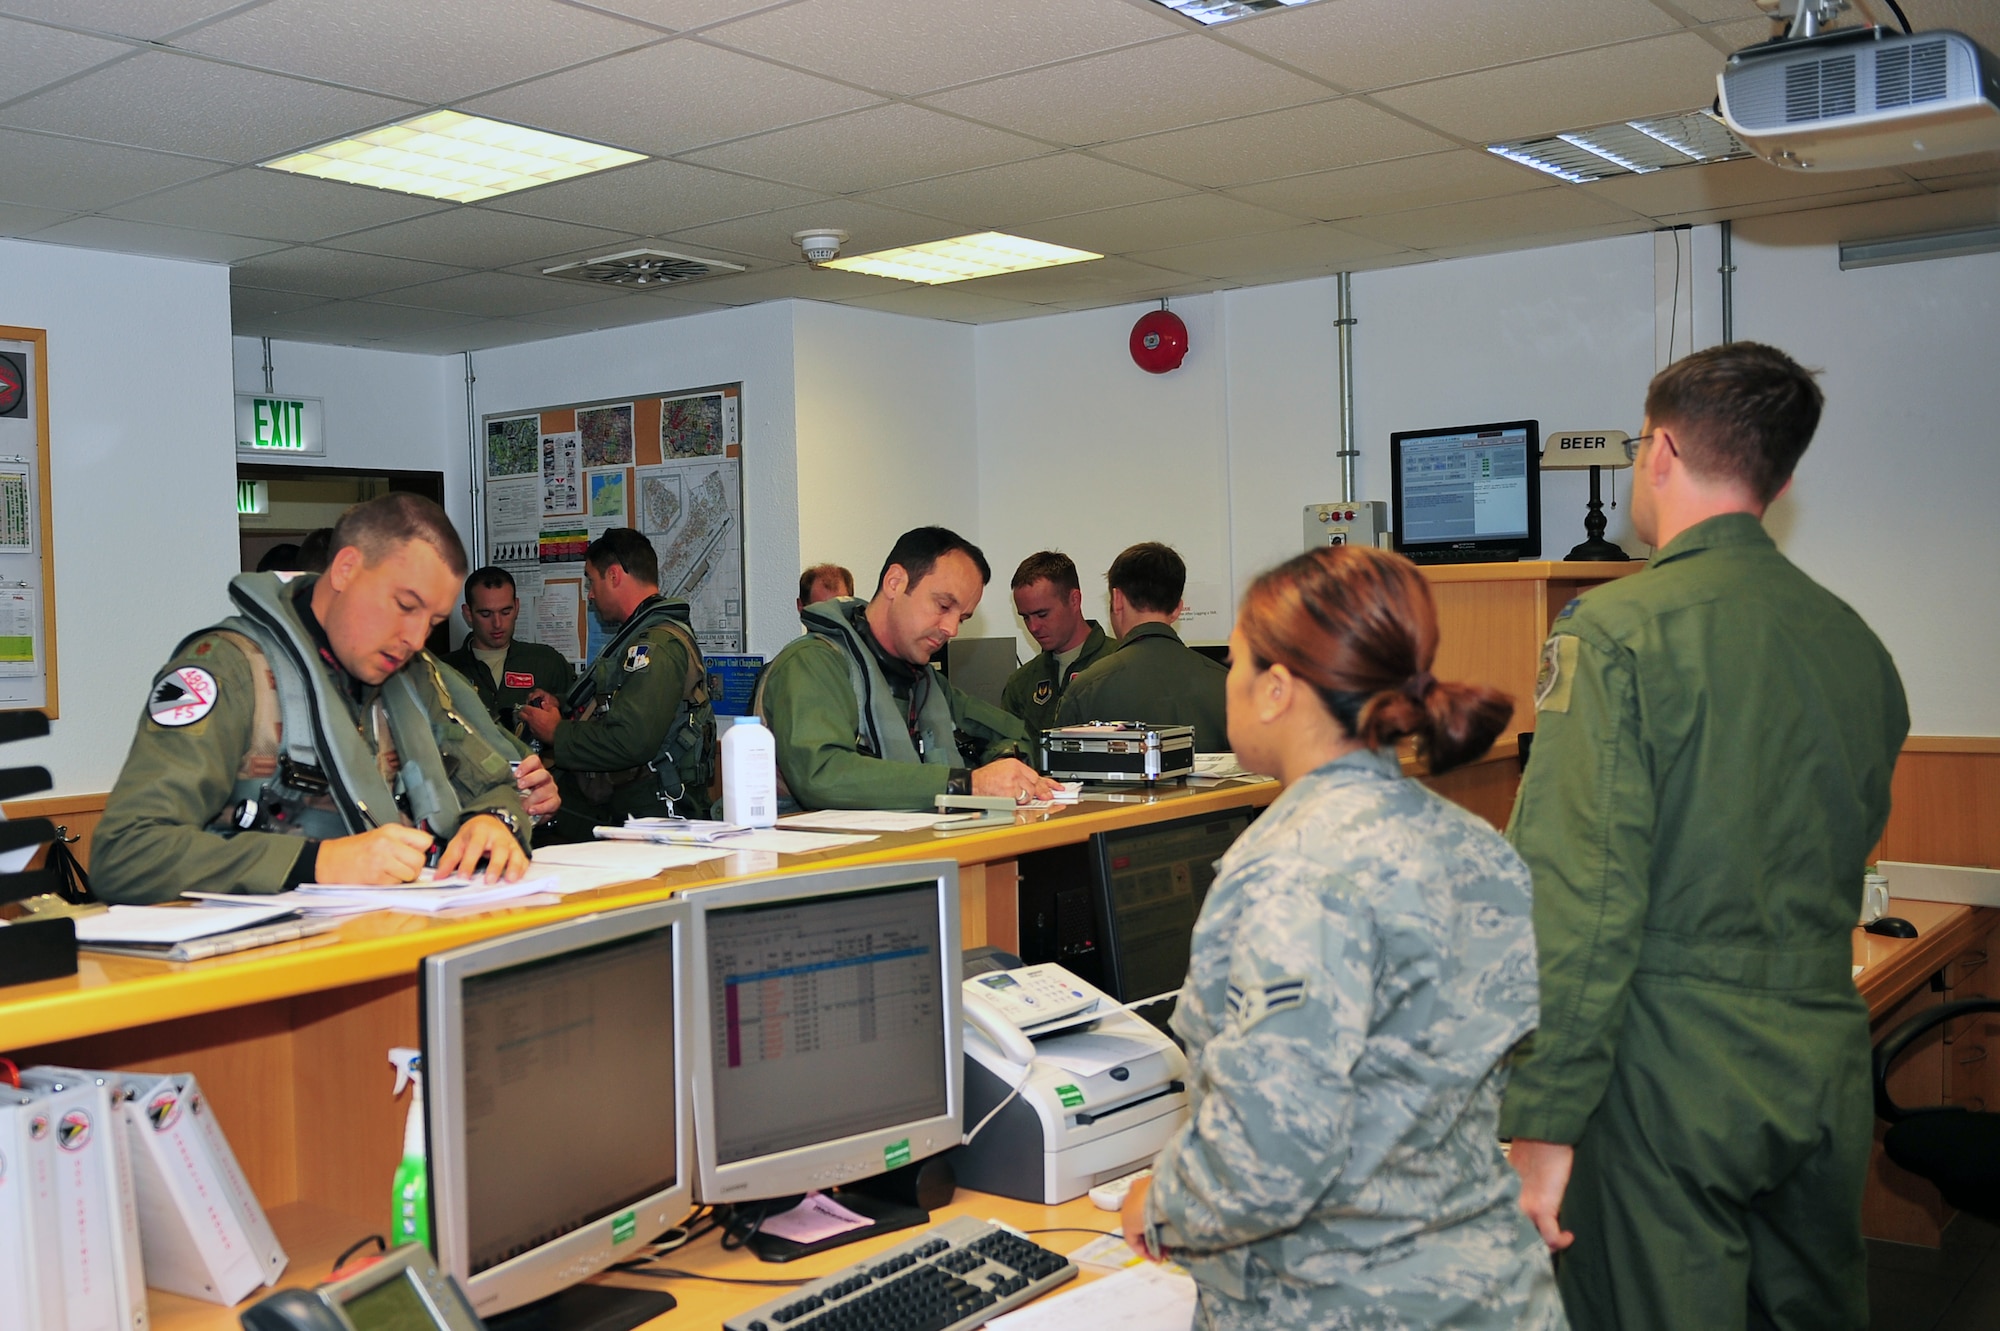 SPANGDAHLEM AIR BASE, Germany – Pilots from the 480th Fighter Squadron fill out pre-flight brief forms at the 480th FS operations desk here Aug. 23 before departing for Nordic Air Meet 2012. The fighter squadron departed for the multi-national training exercise to share and exchange new combat tactics with allied countries. (U.S. Air Force photo by Airman 1st Class Dillon Davis/Released)